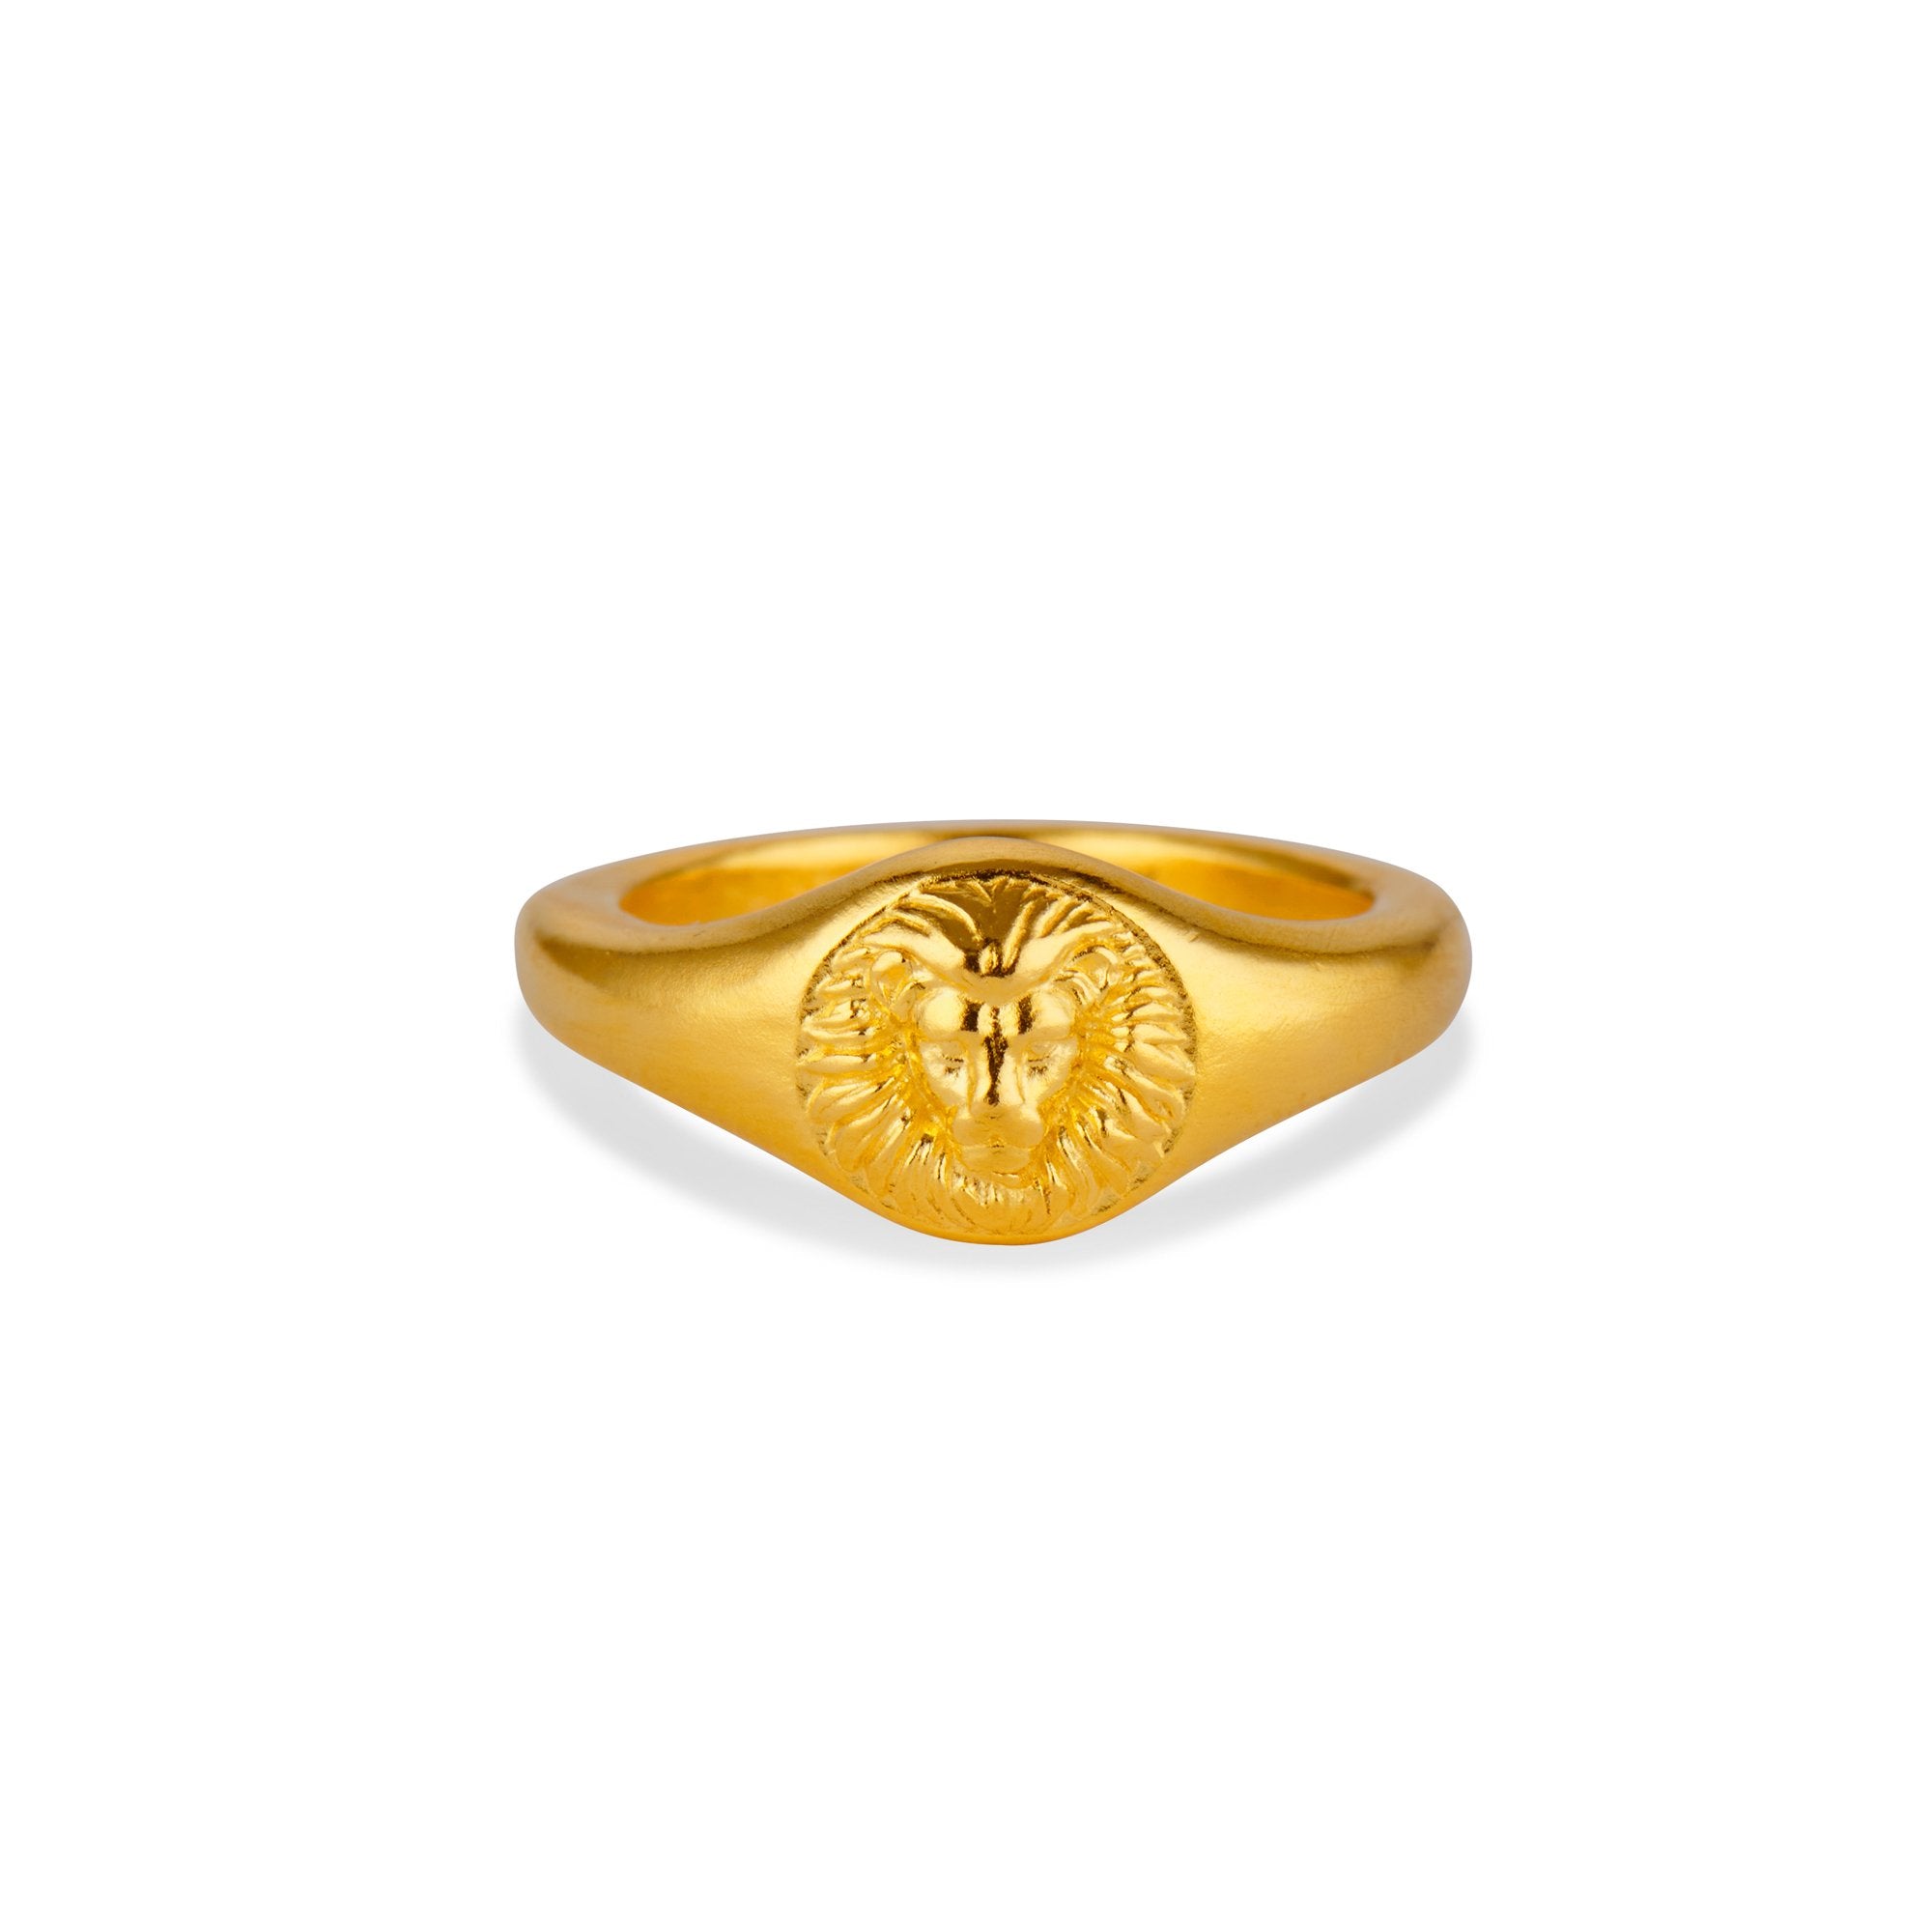 Lion Signet Ring - Lapis Gemstone - Gold Plated Sterling Silver - Regnas